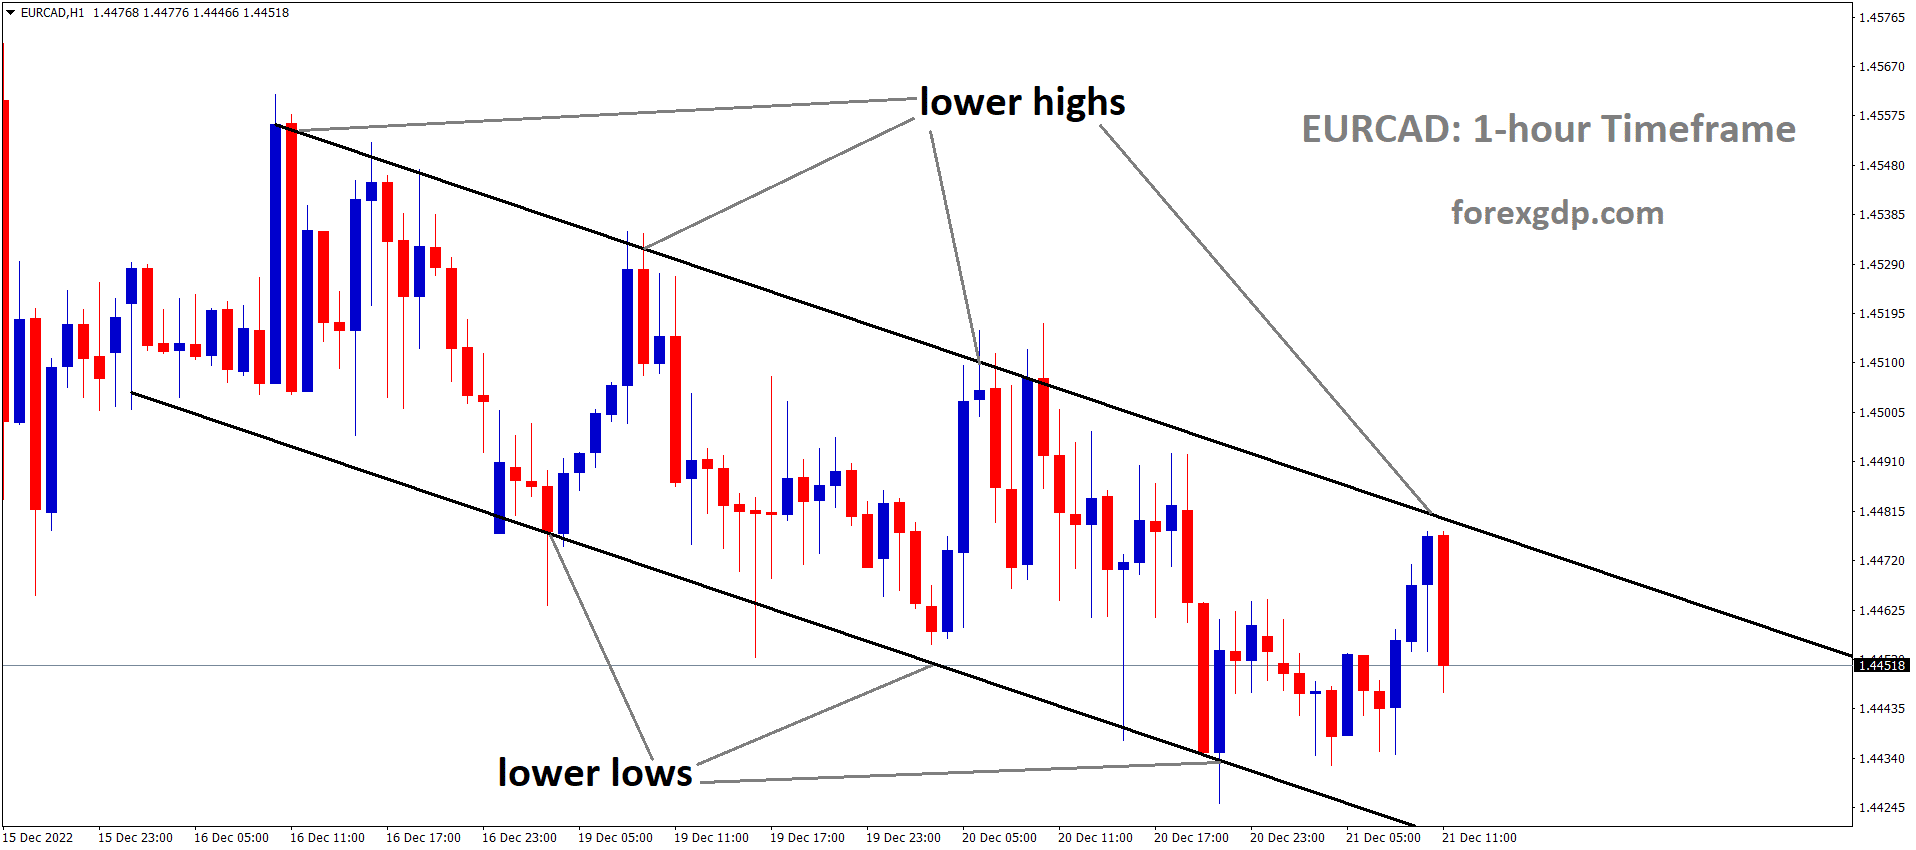 EURCAD is moving in the Descending channel and the market has fallen from the lower high area of the channel